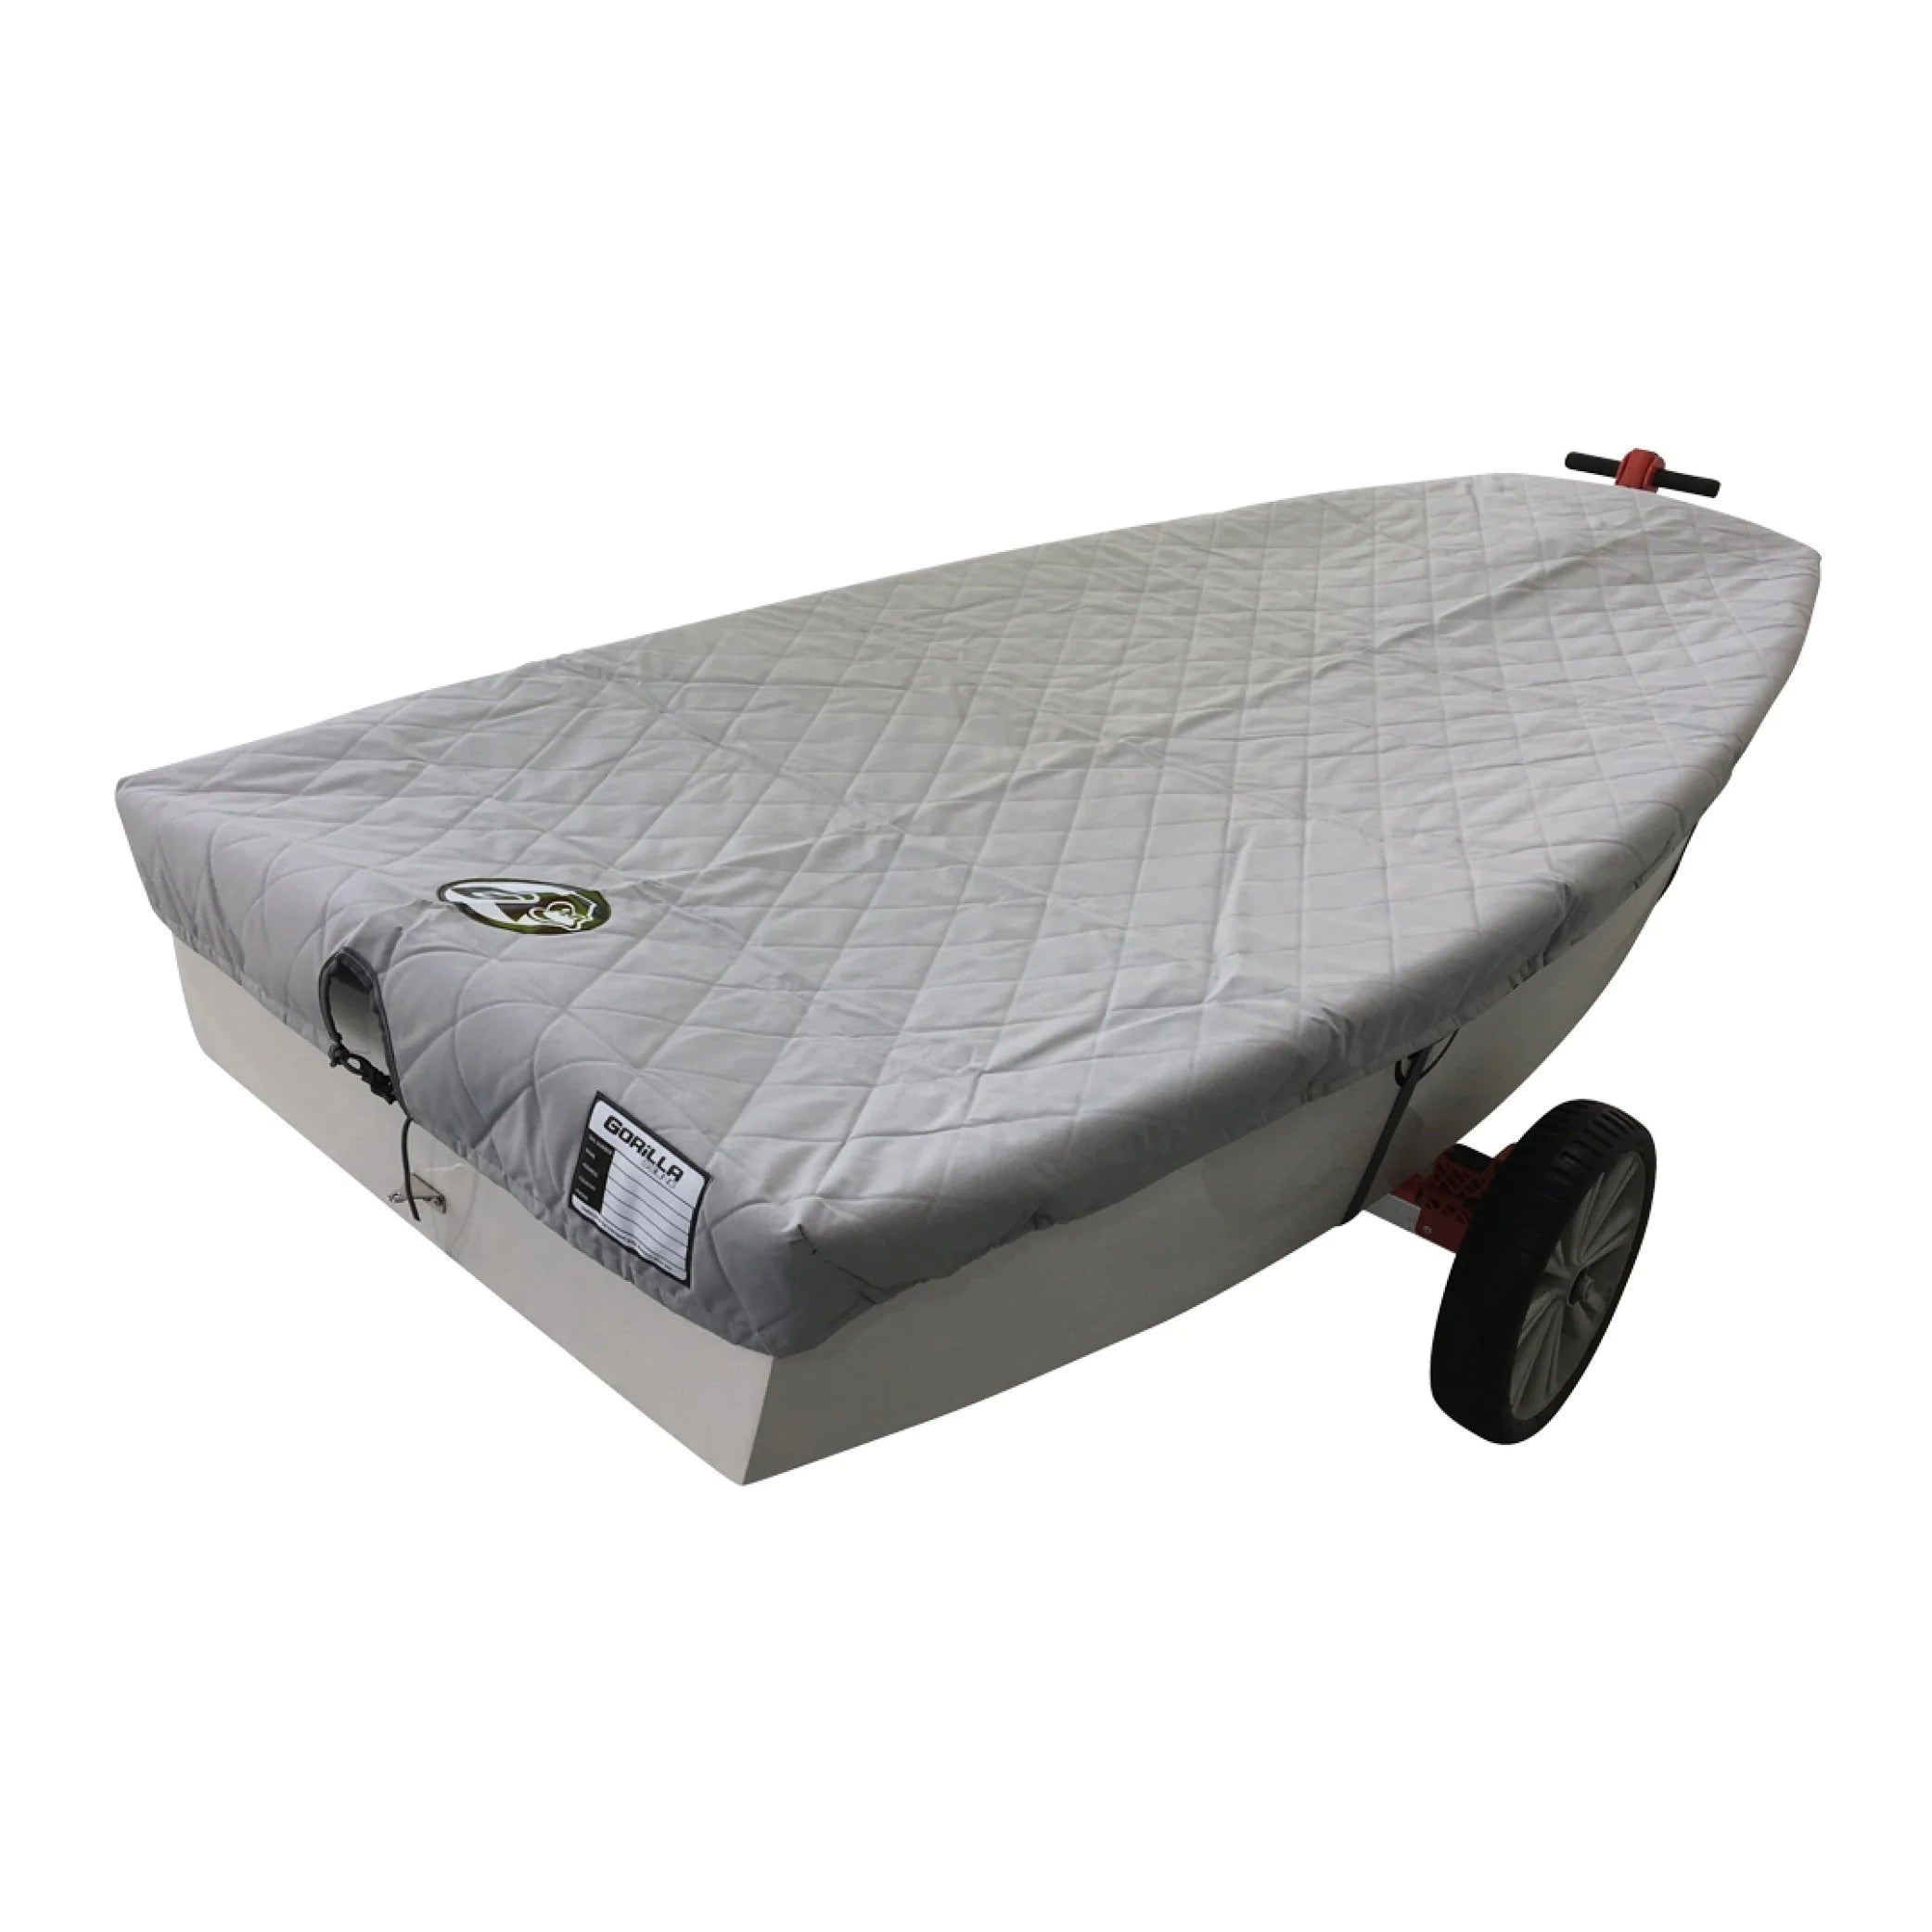 Optimist Quilted "Hydrolite" Top Cover